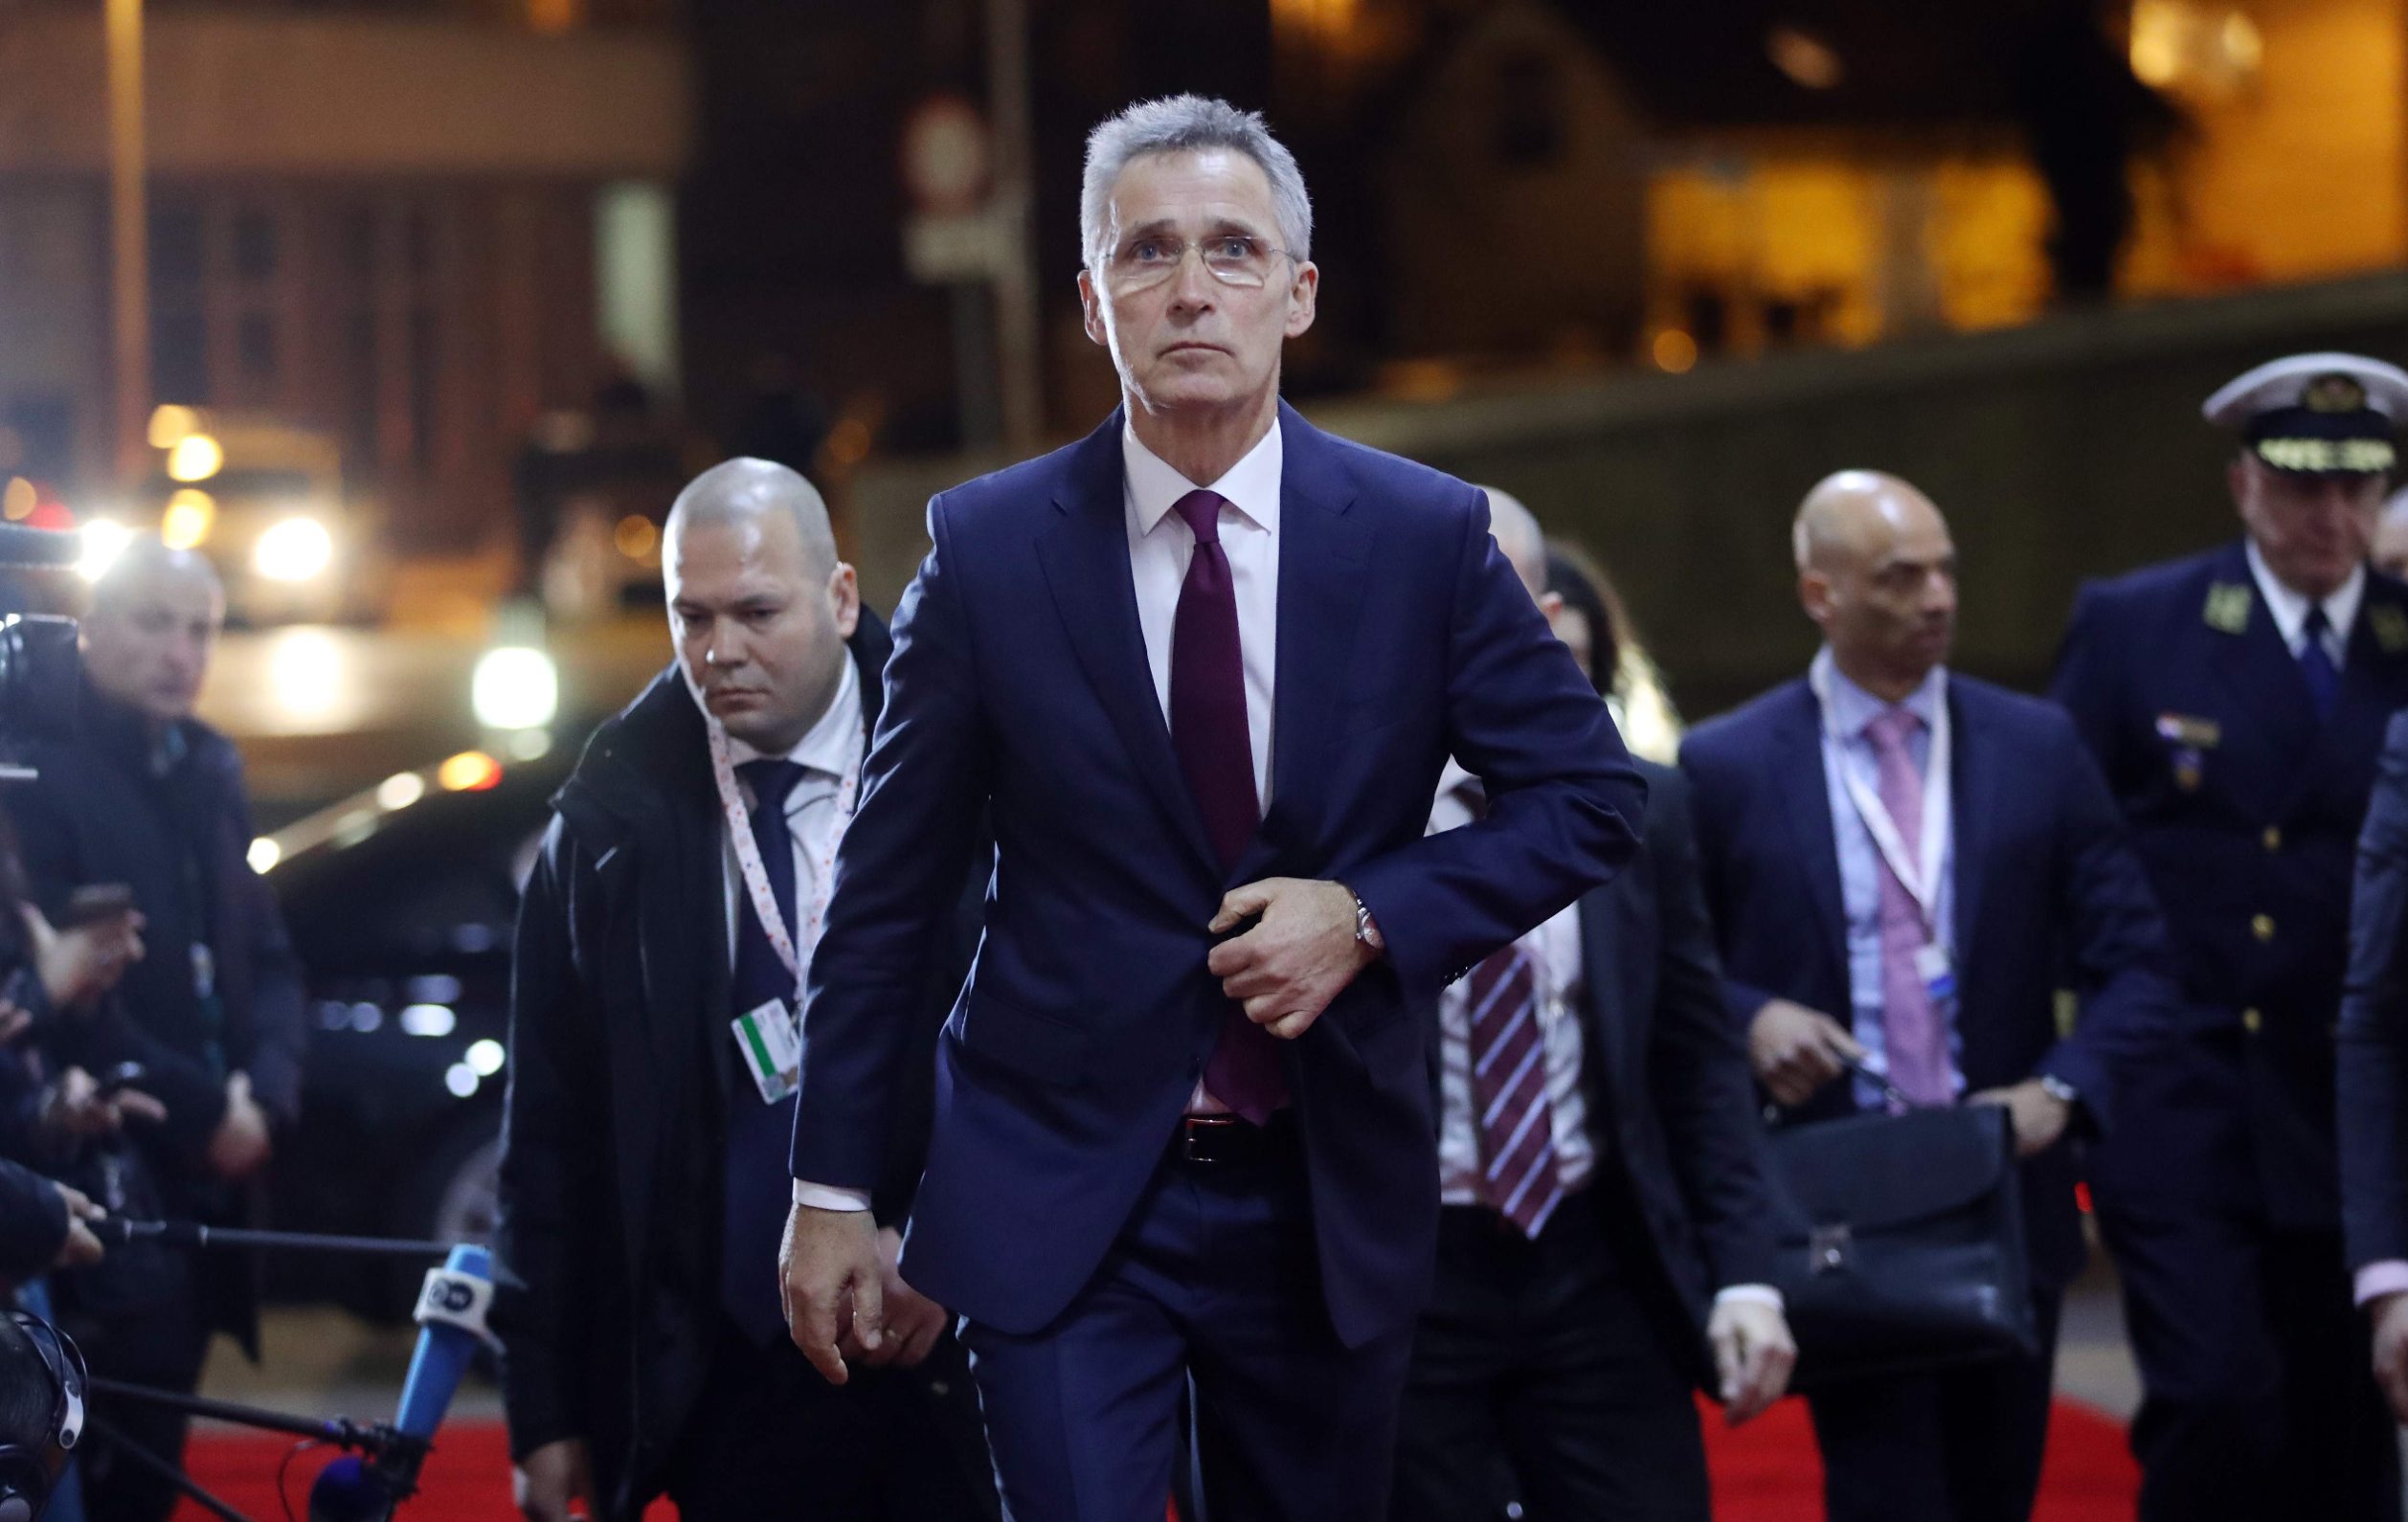 NATO Secretary General Jens Stoltenberg arrives for the Informal Meeting of EU Defence Ministers in Zagreb